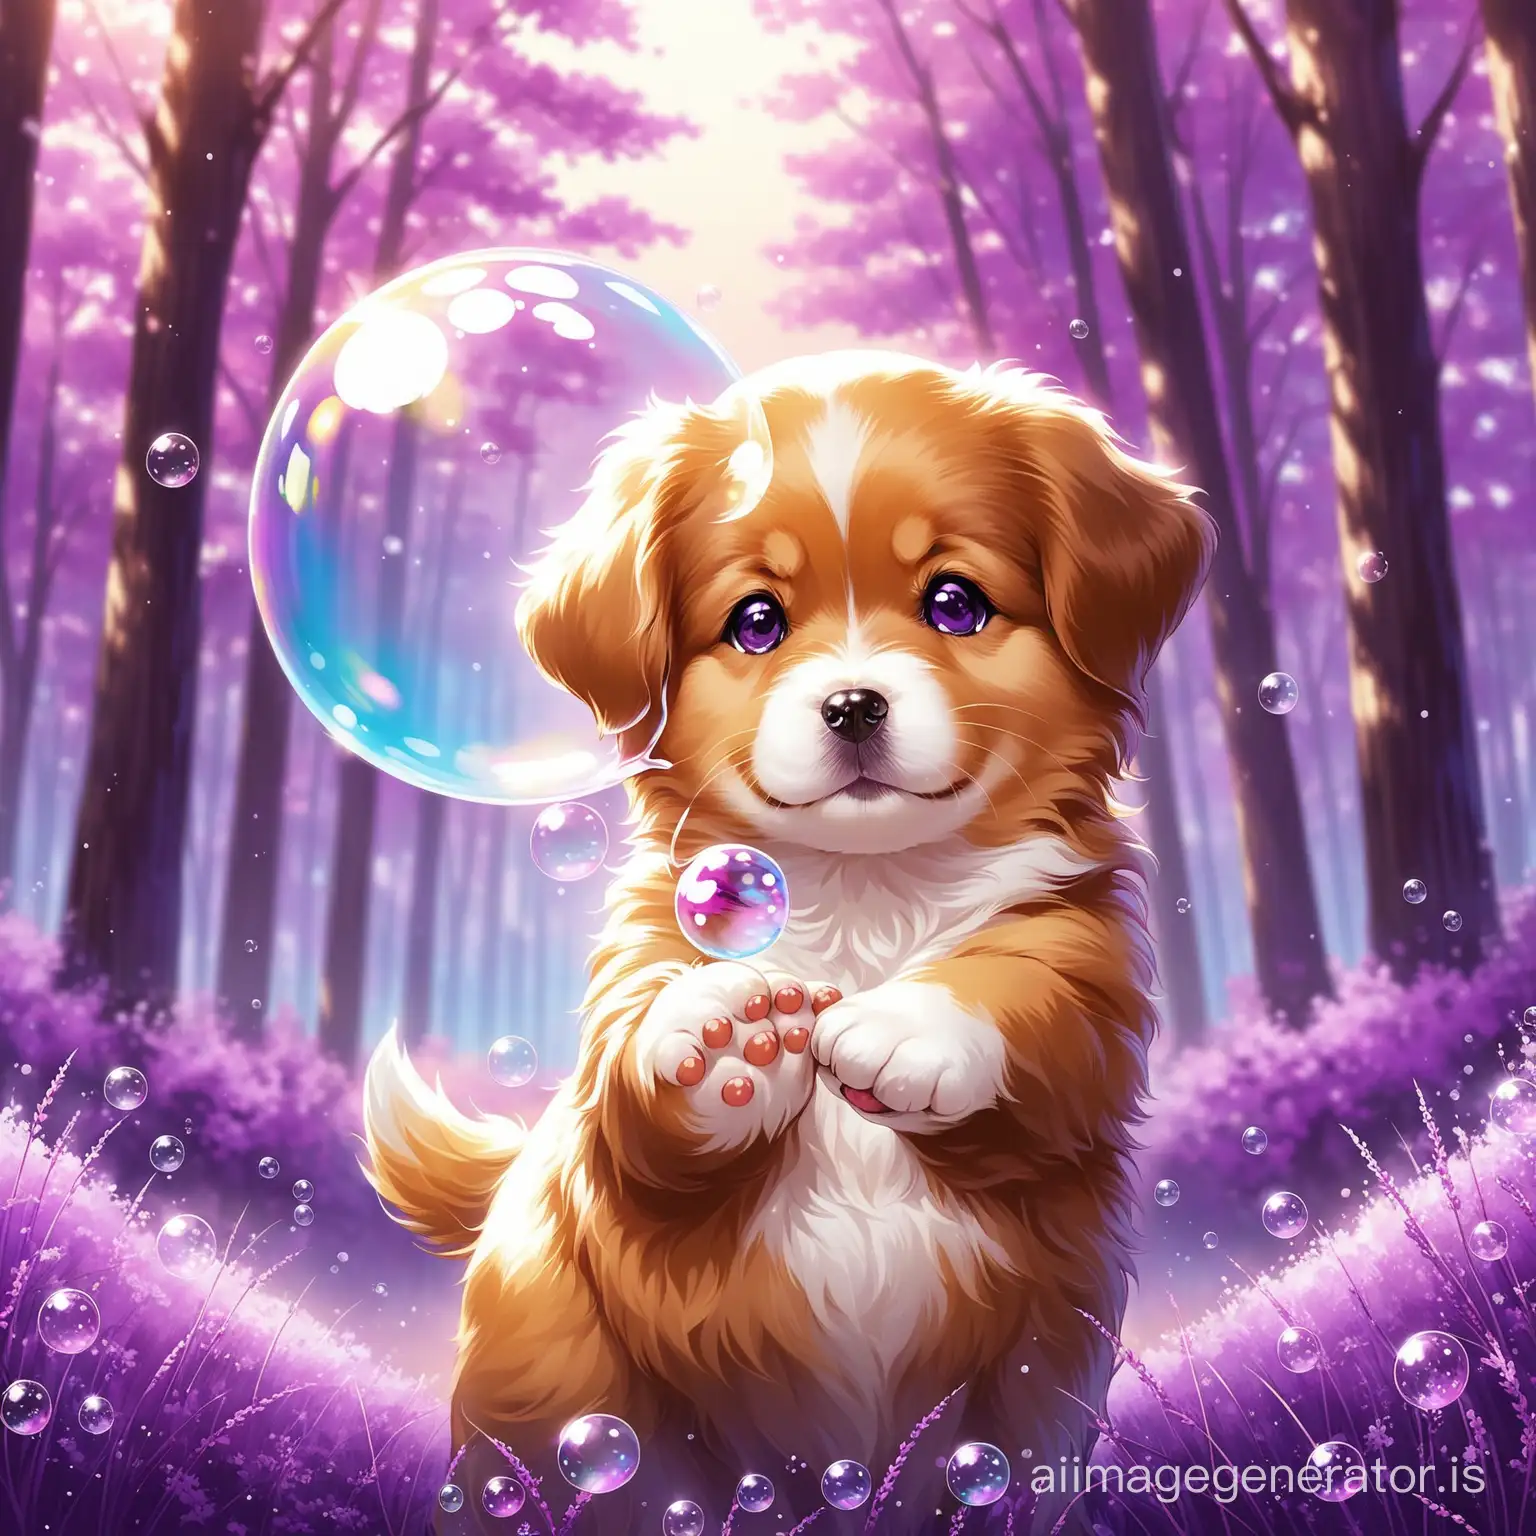 A baby dog holding a big bubble in his hands. This dog is in purple nature The details are beautifully evident